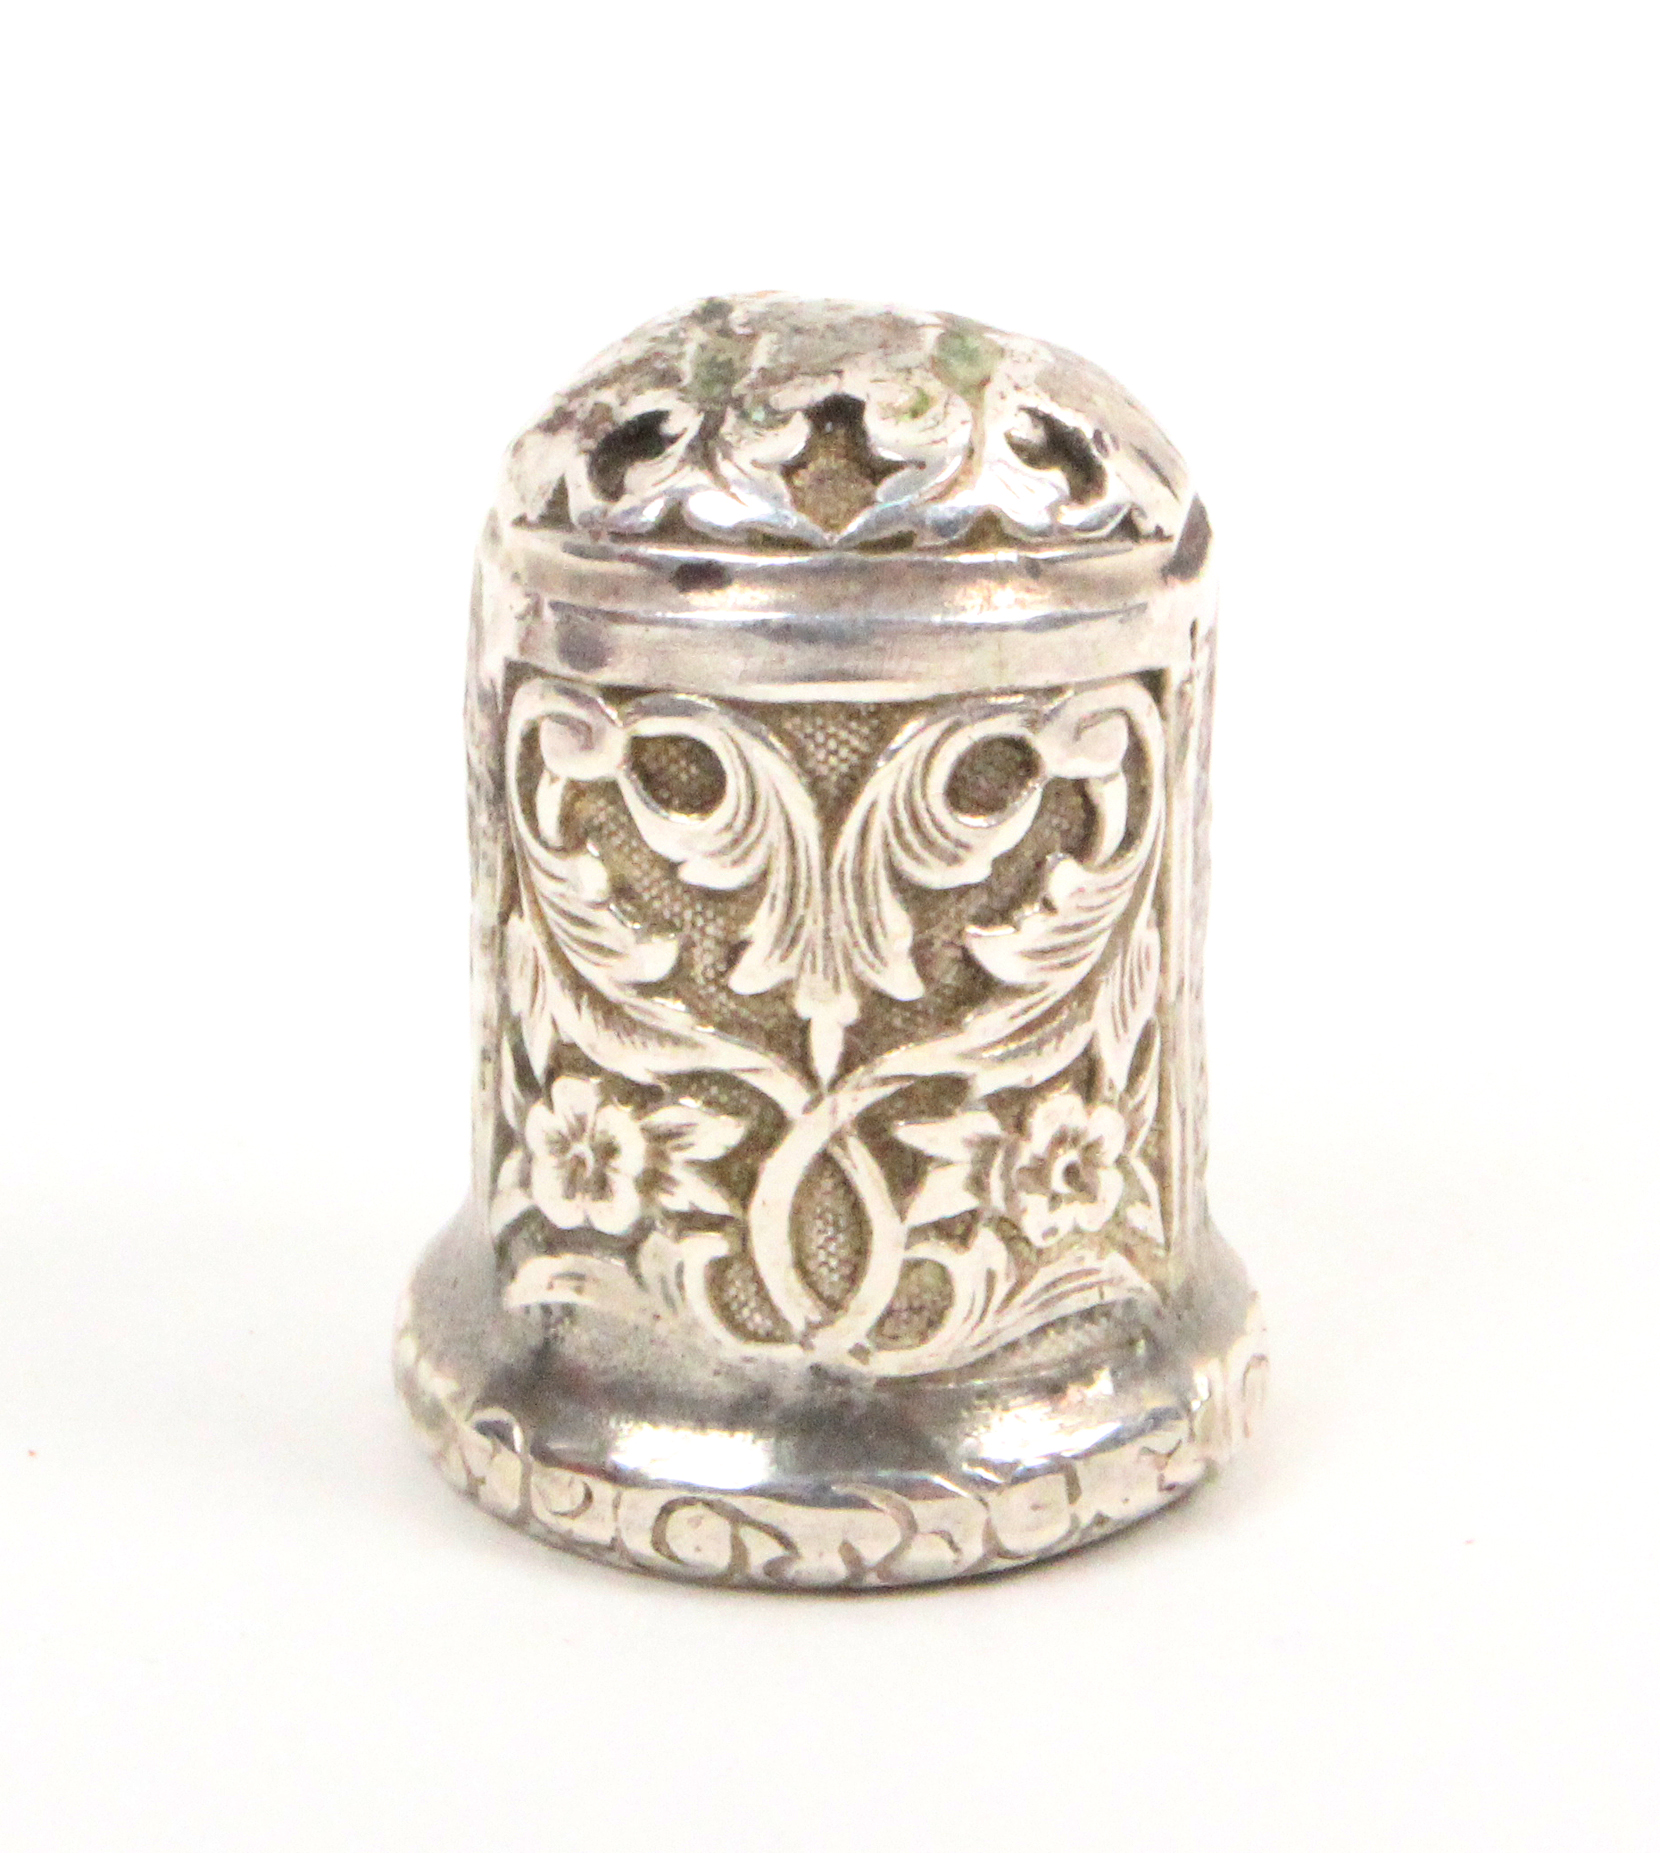 A 17th/18th Century silver thimble the body chased with leaf scrolls and flowers over an engraved